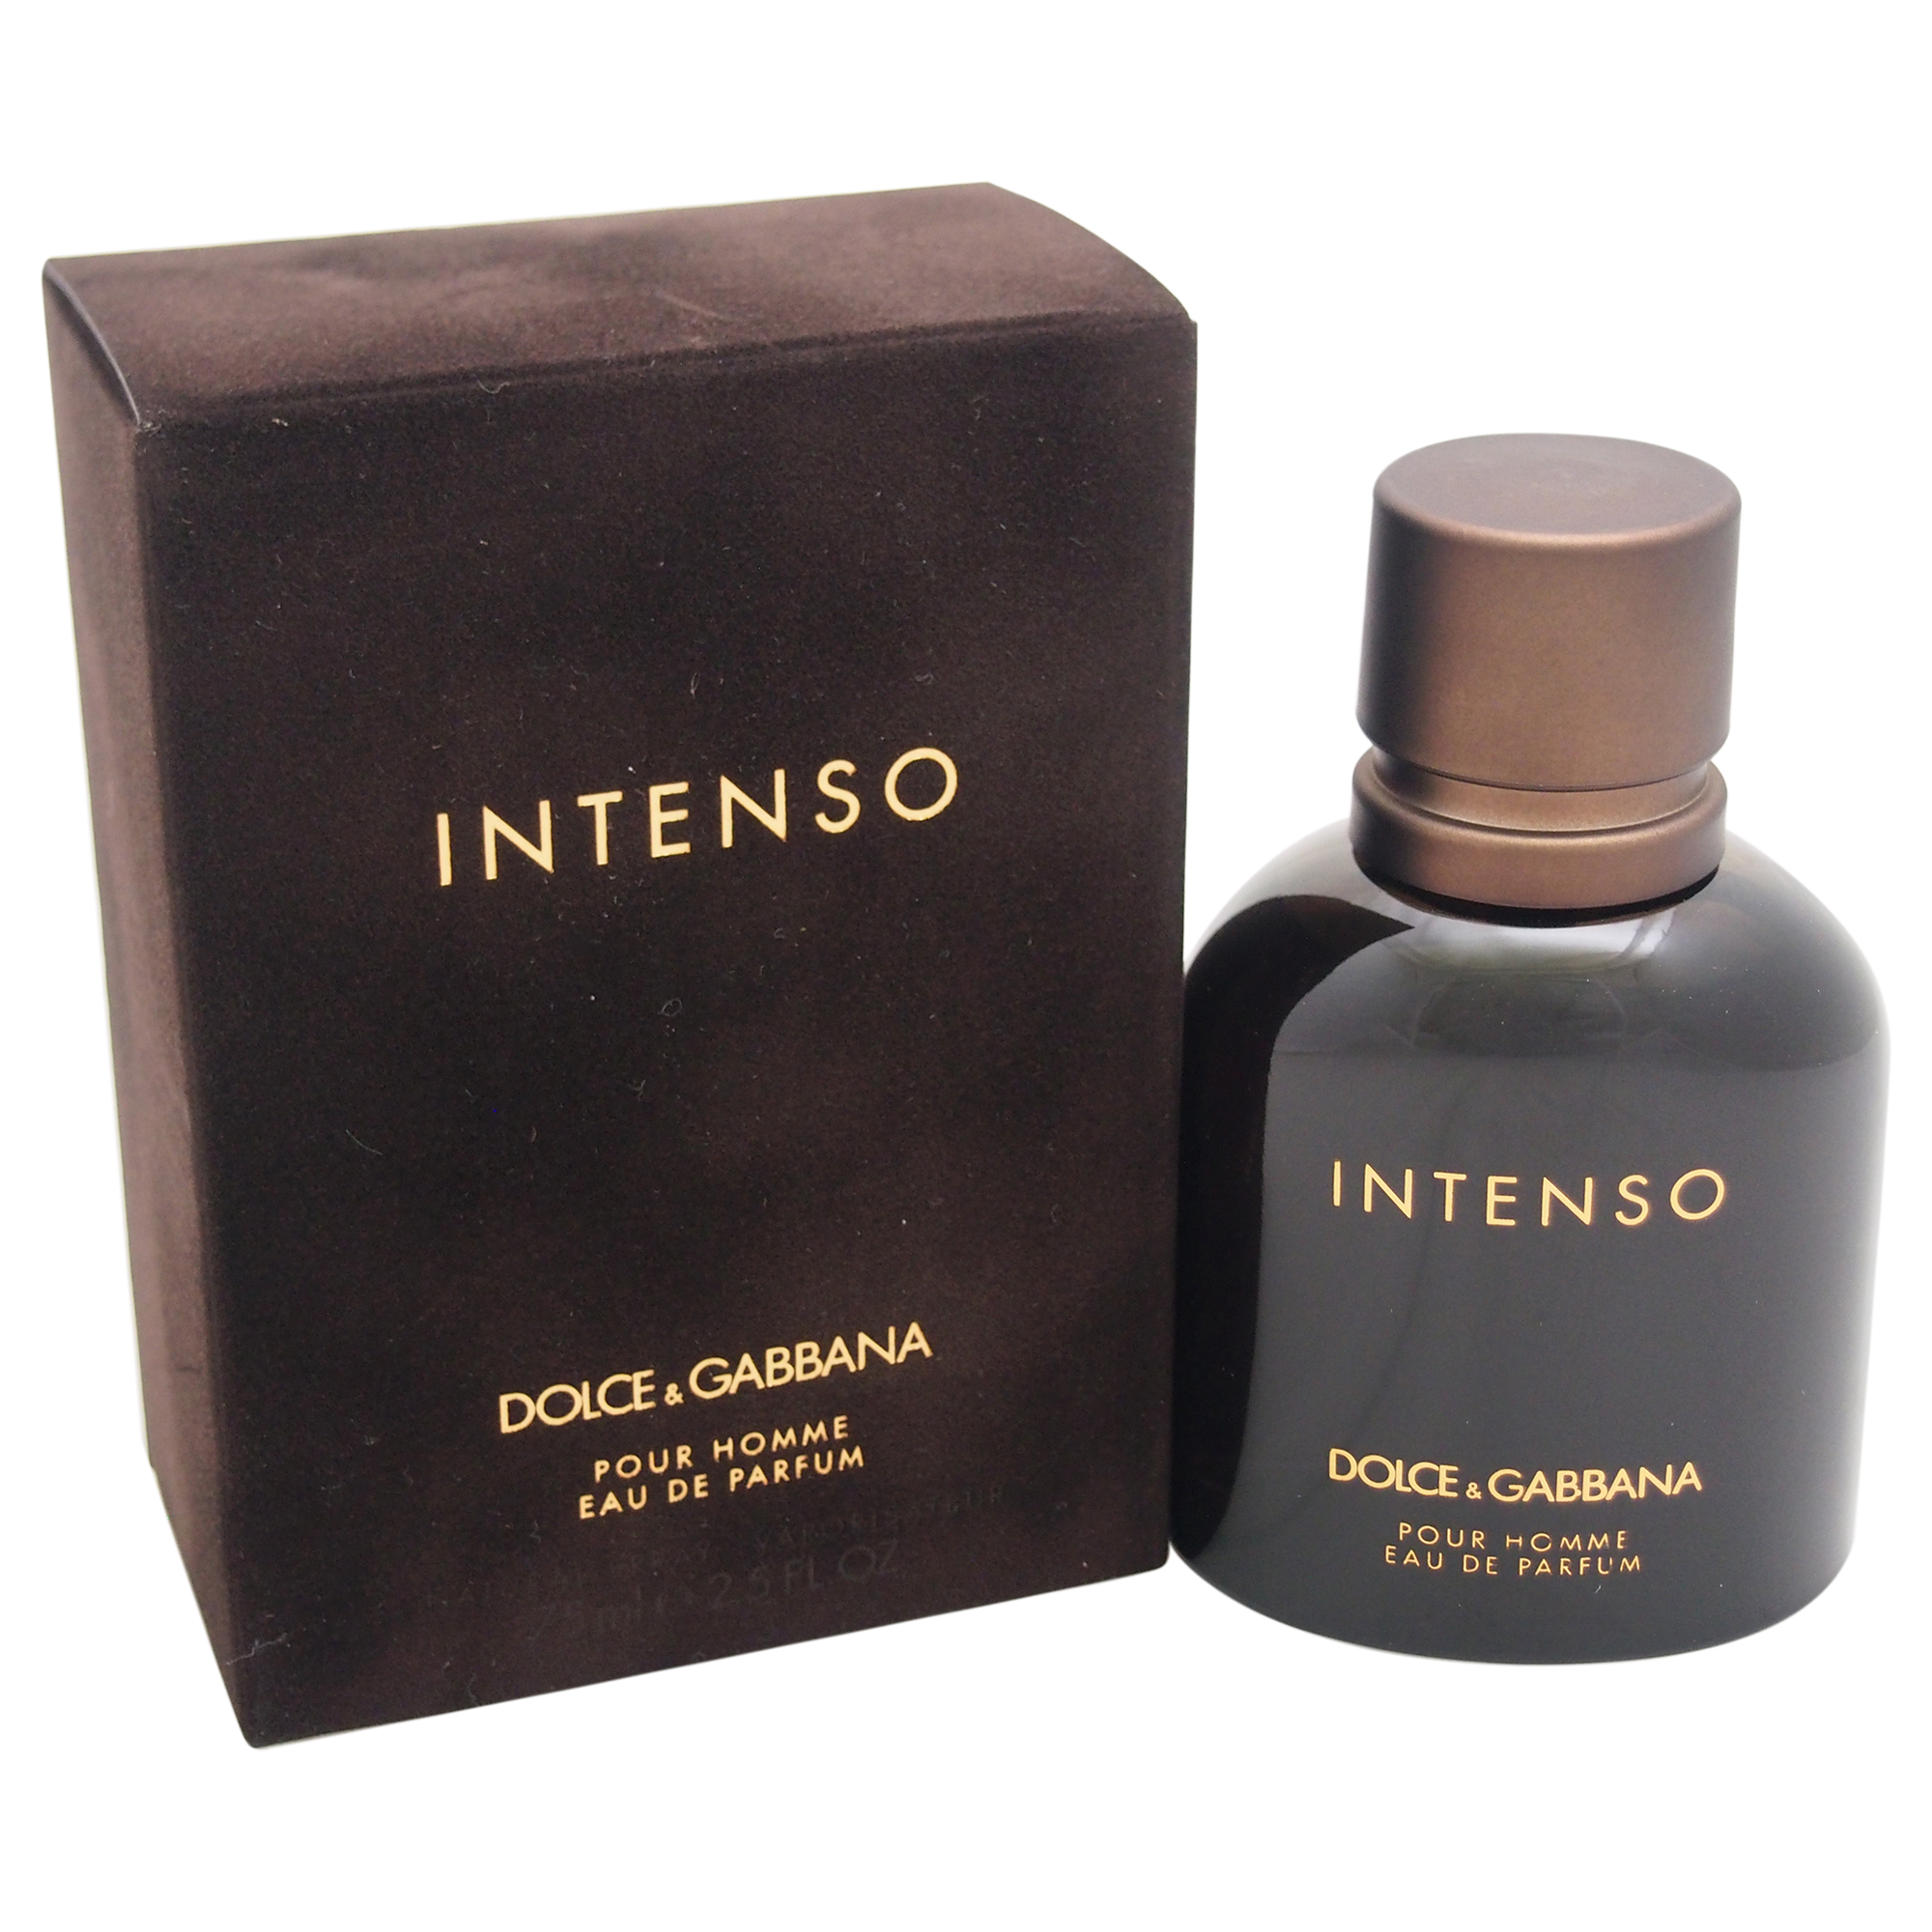 Pour Homme Intenso by Dolce \u0026 Gabbana 